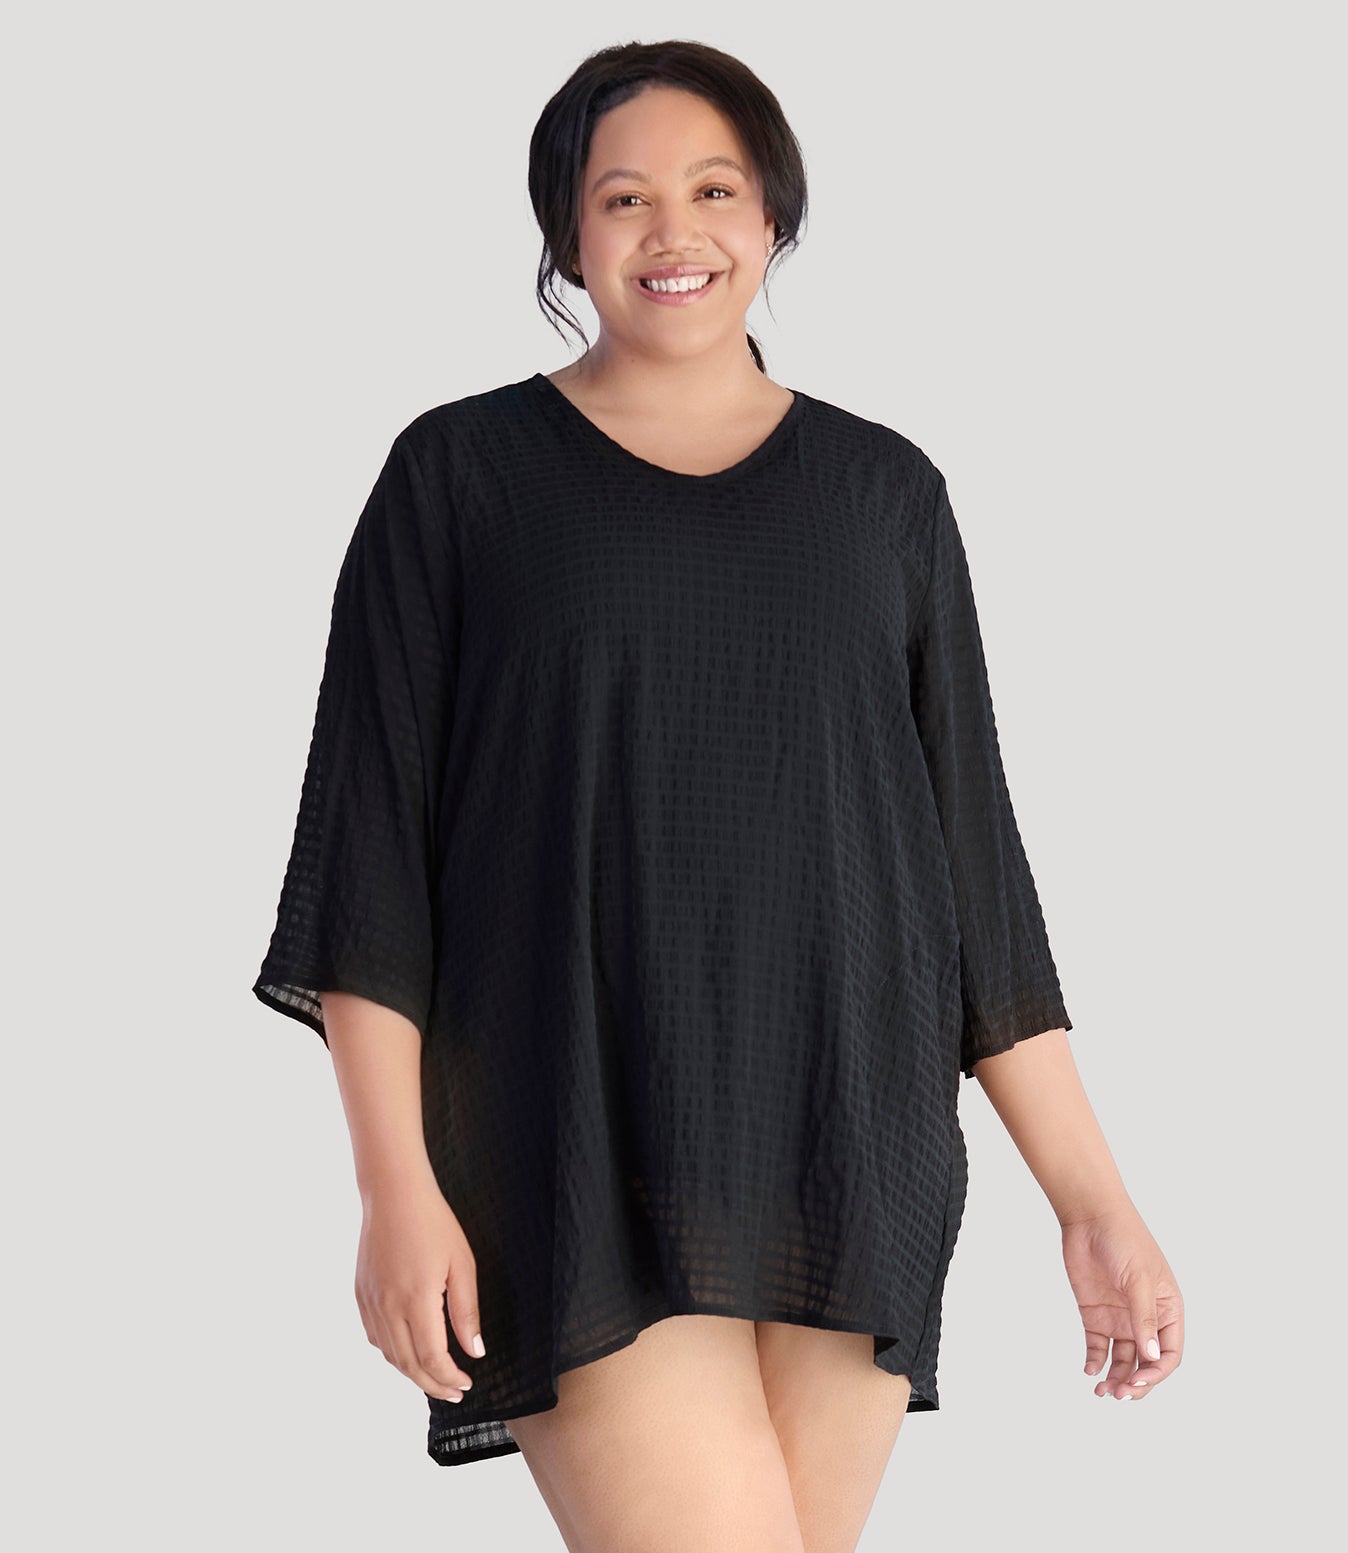 Plus size model, facing front, wearing JunoActive's BellaStyle Tunic Cover-up in color black.